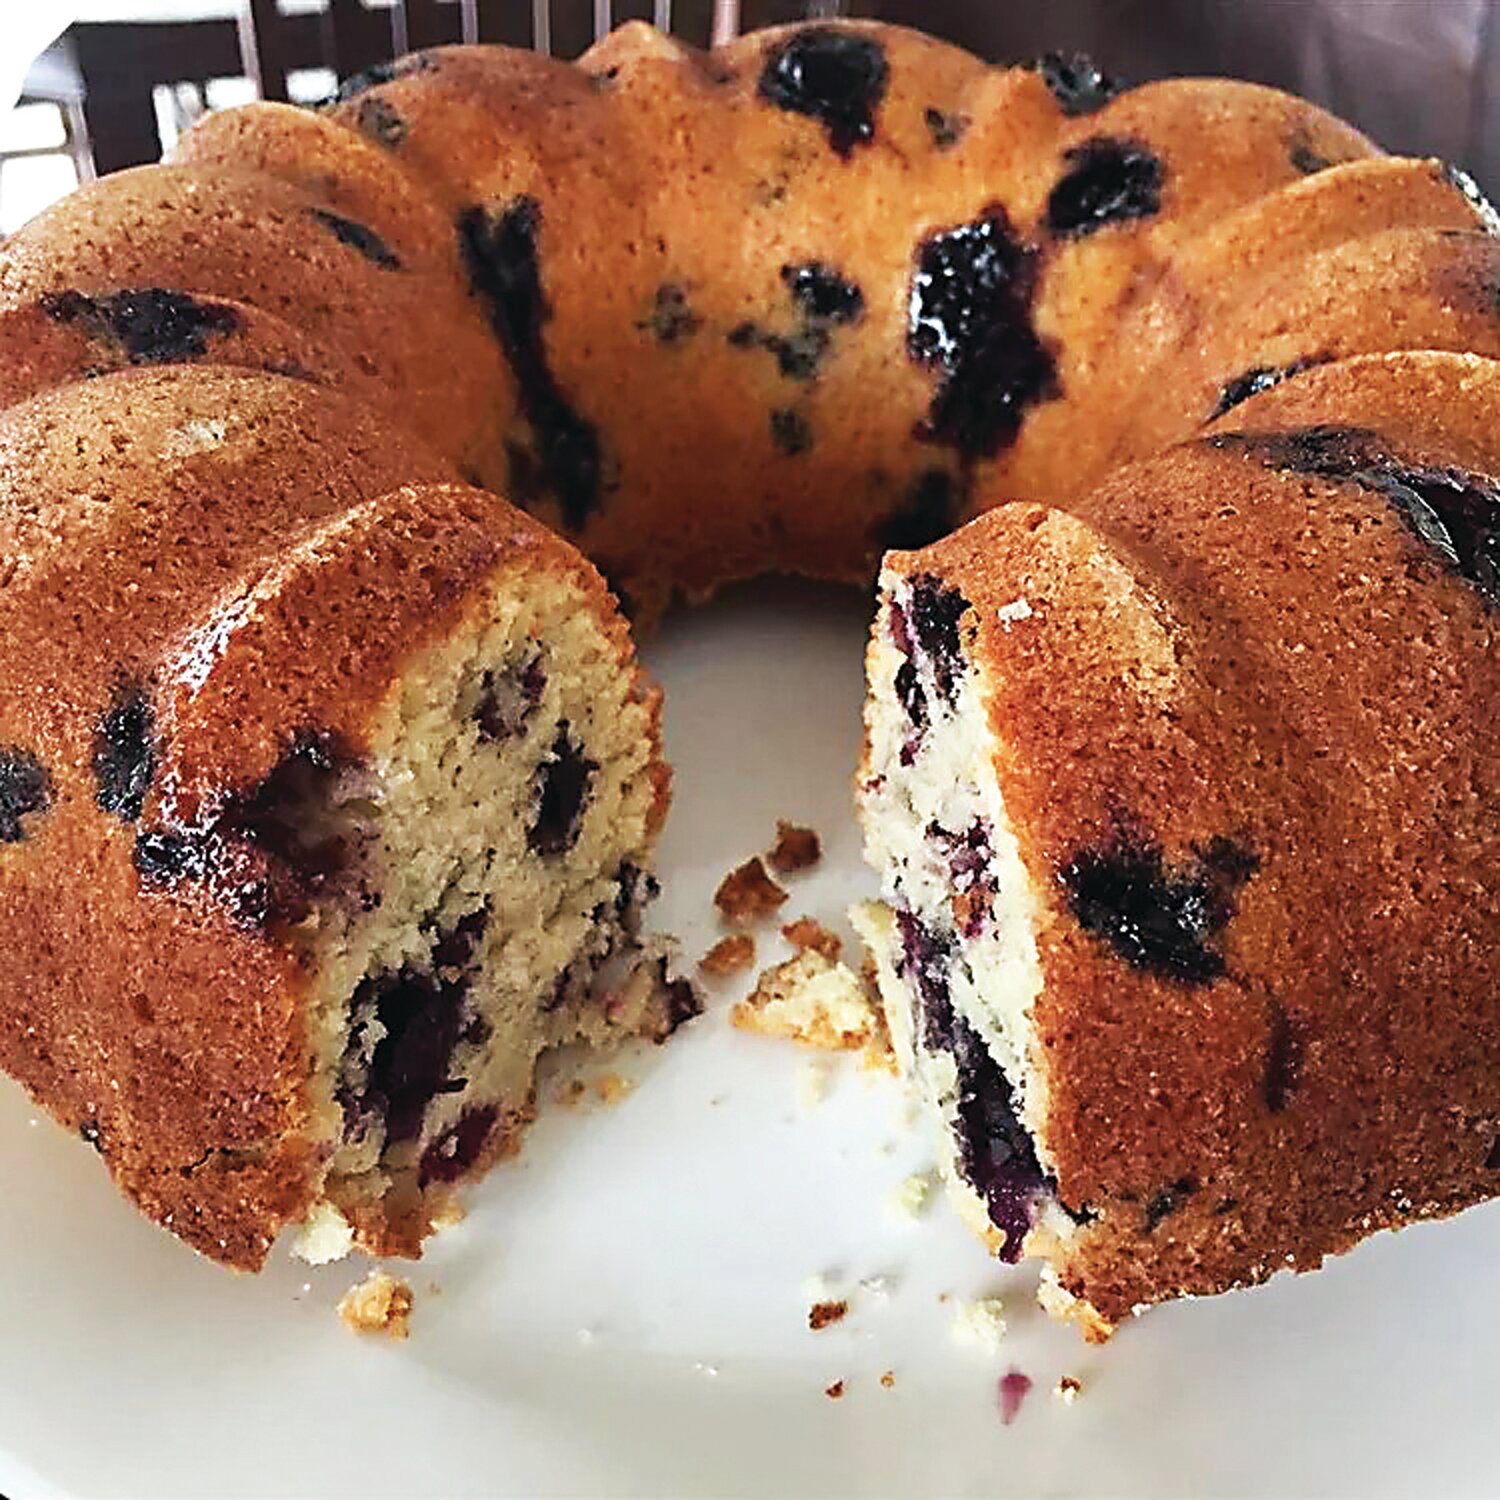 There are so many things you can do with fresh blueberries including making this pound cake, which is good with coffee, for snacking and in lunches.